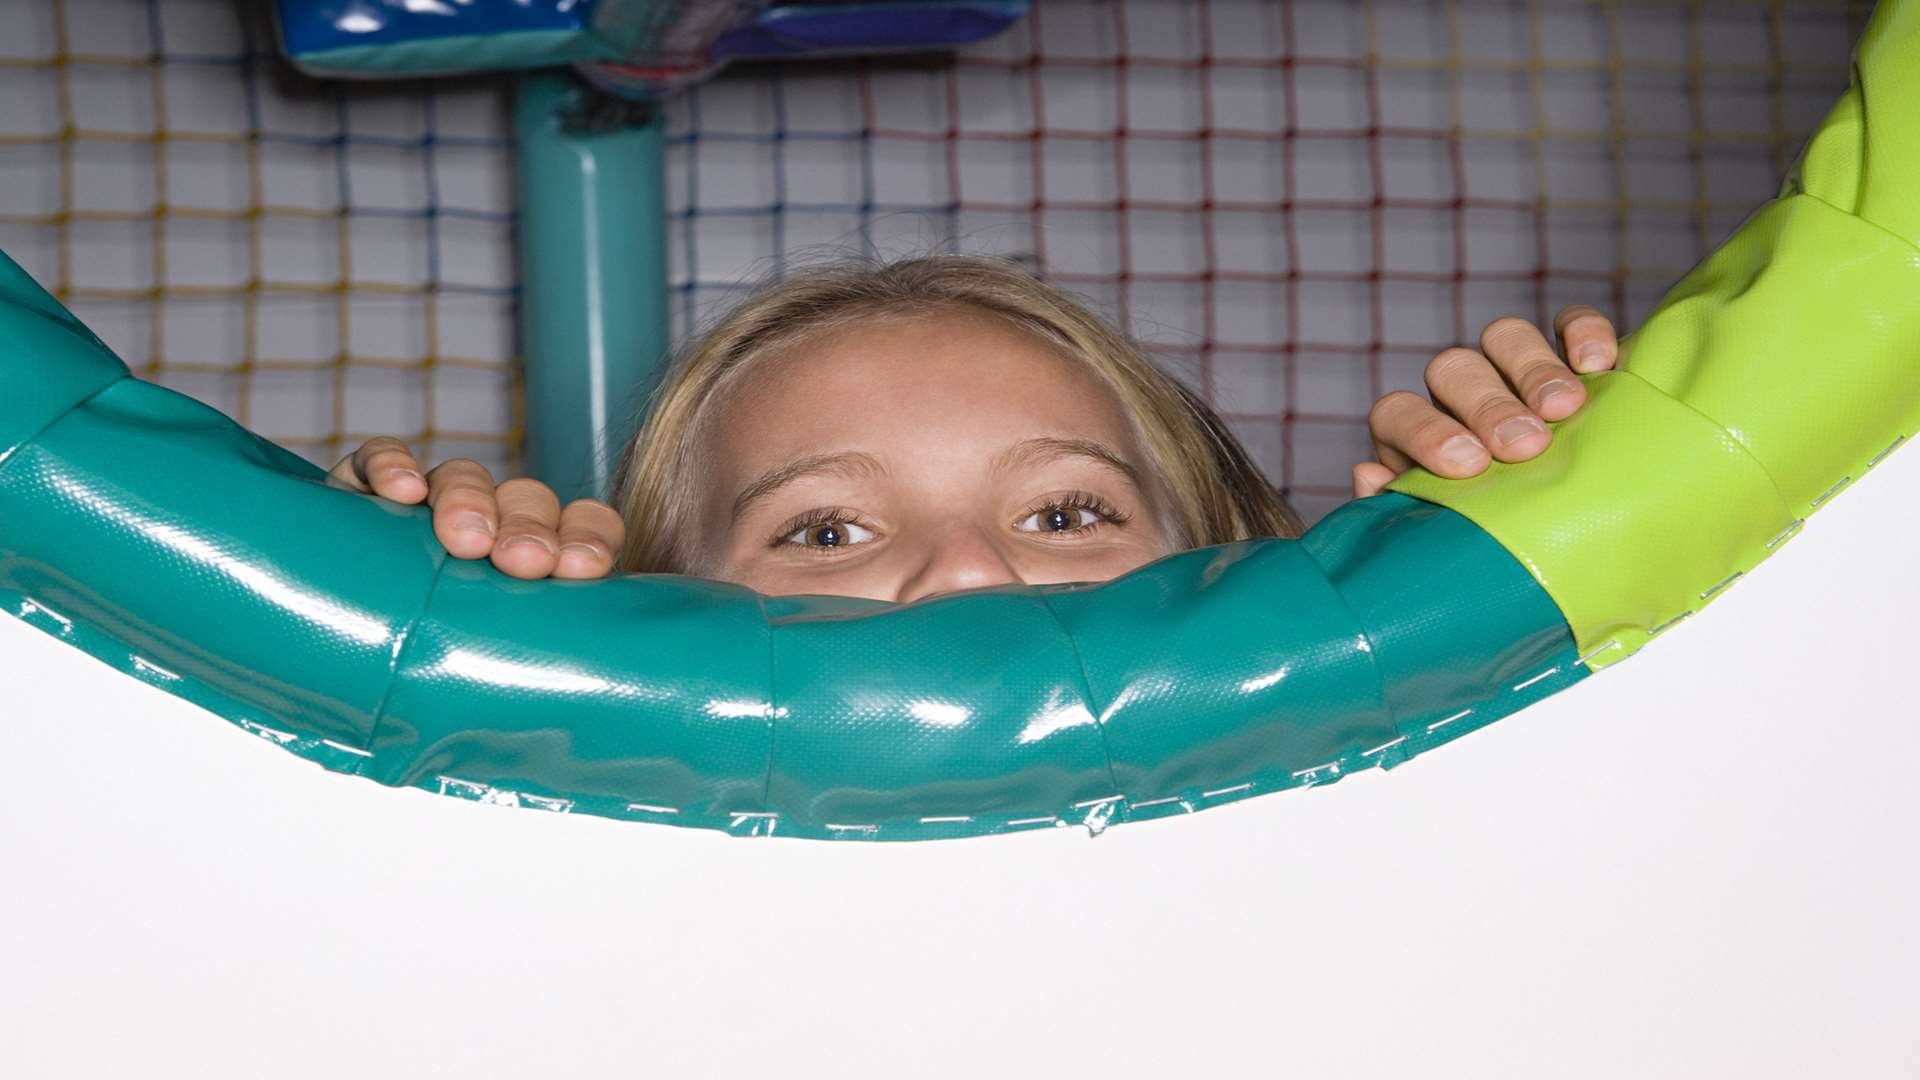 Girl in soft play area. Stock image.